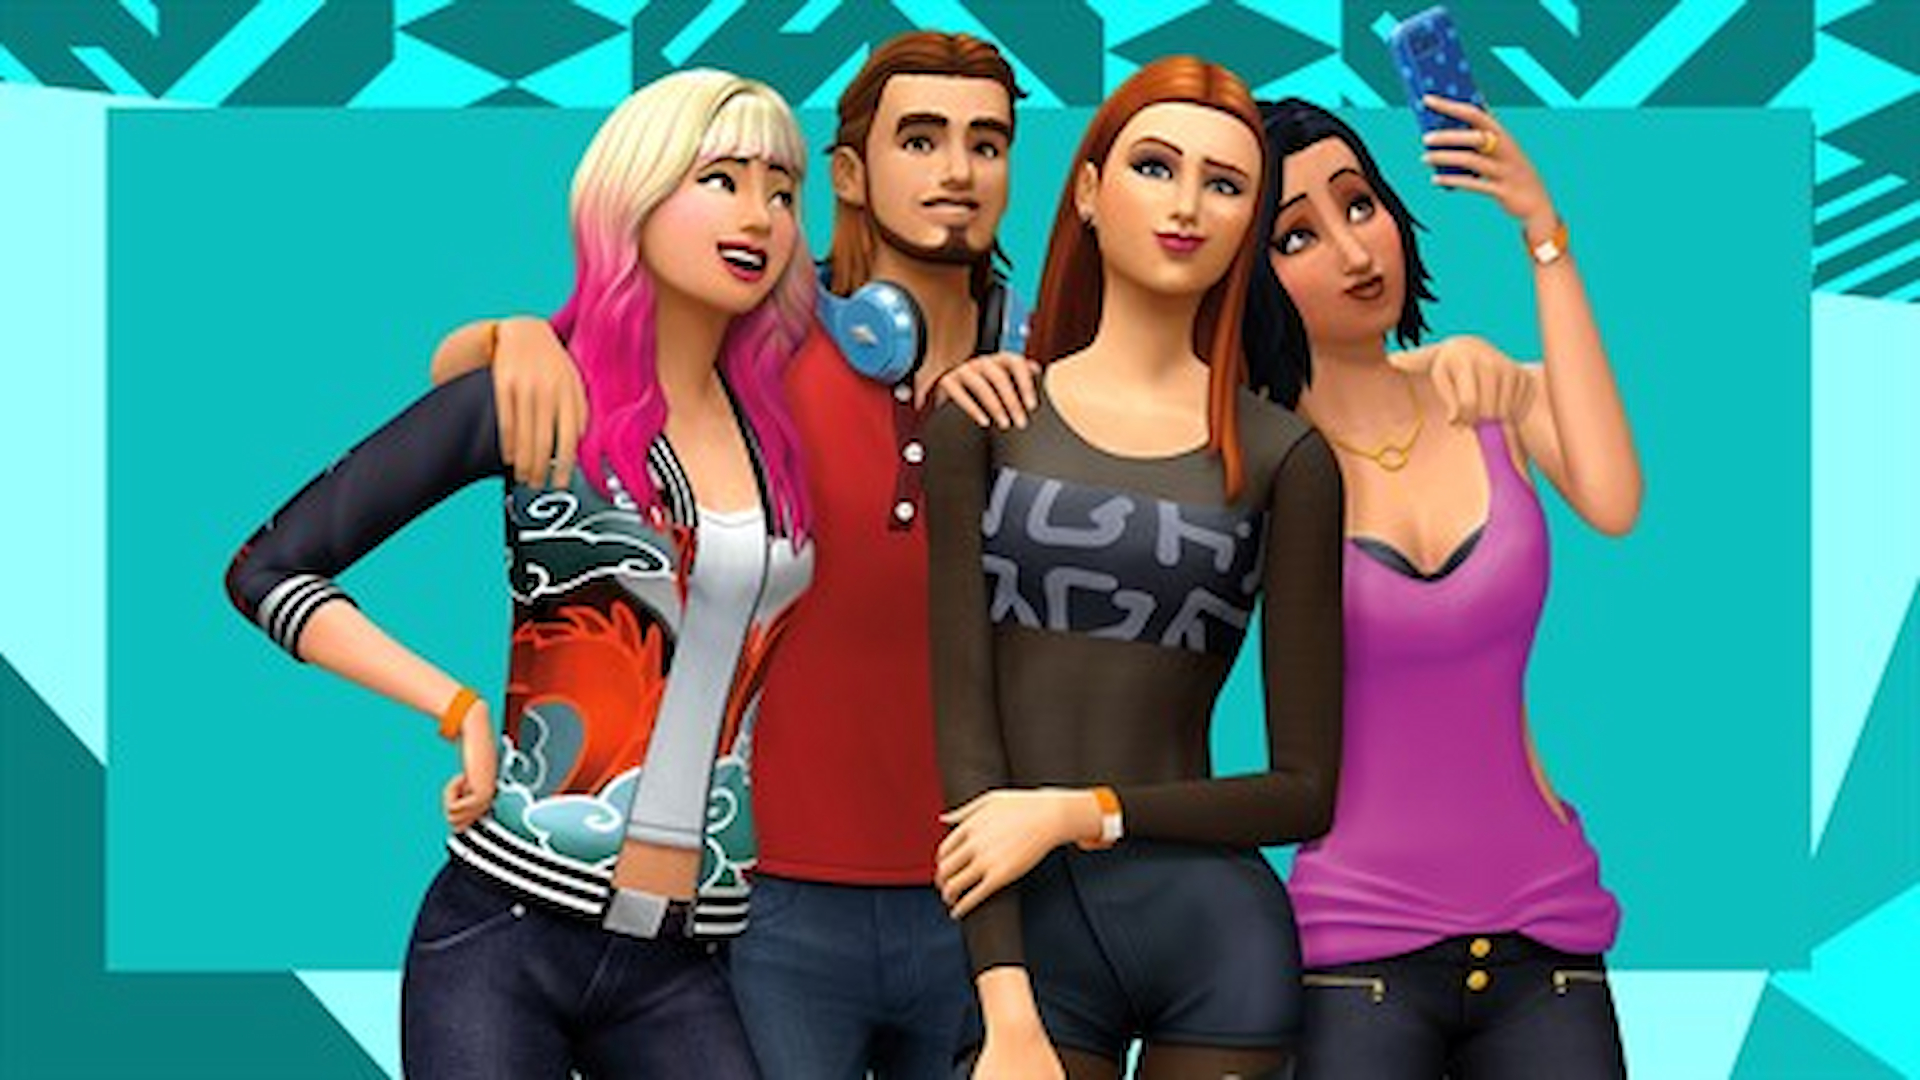 Snag The Sims 4 and all its expansions for cheap, while you can